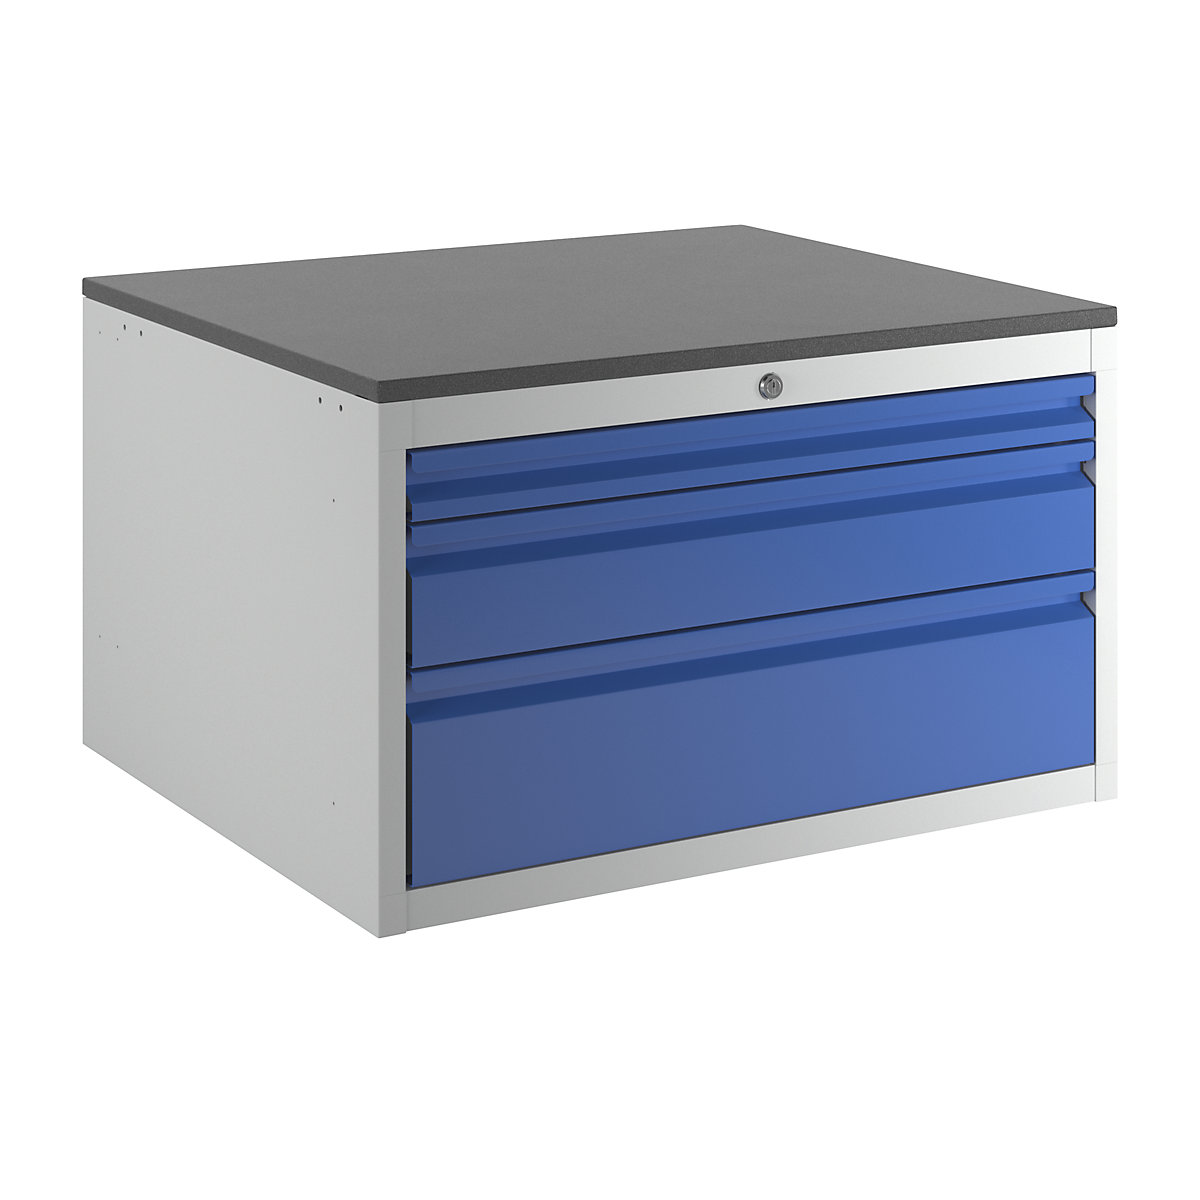 Drawer cupboard with telescopic guides – RAU, height 460 mm, drawers: 2 x 60, 2 x 120 mm, light grey / gentian blue, width 770 mm-8